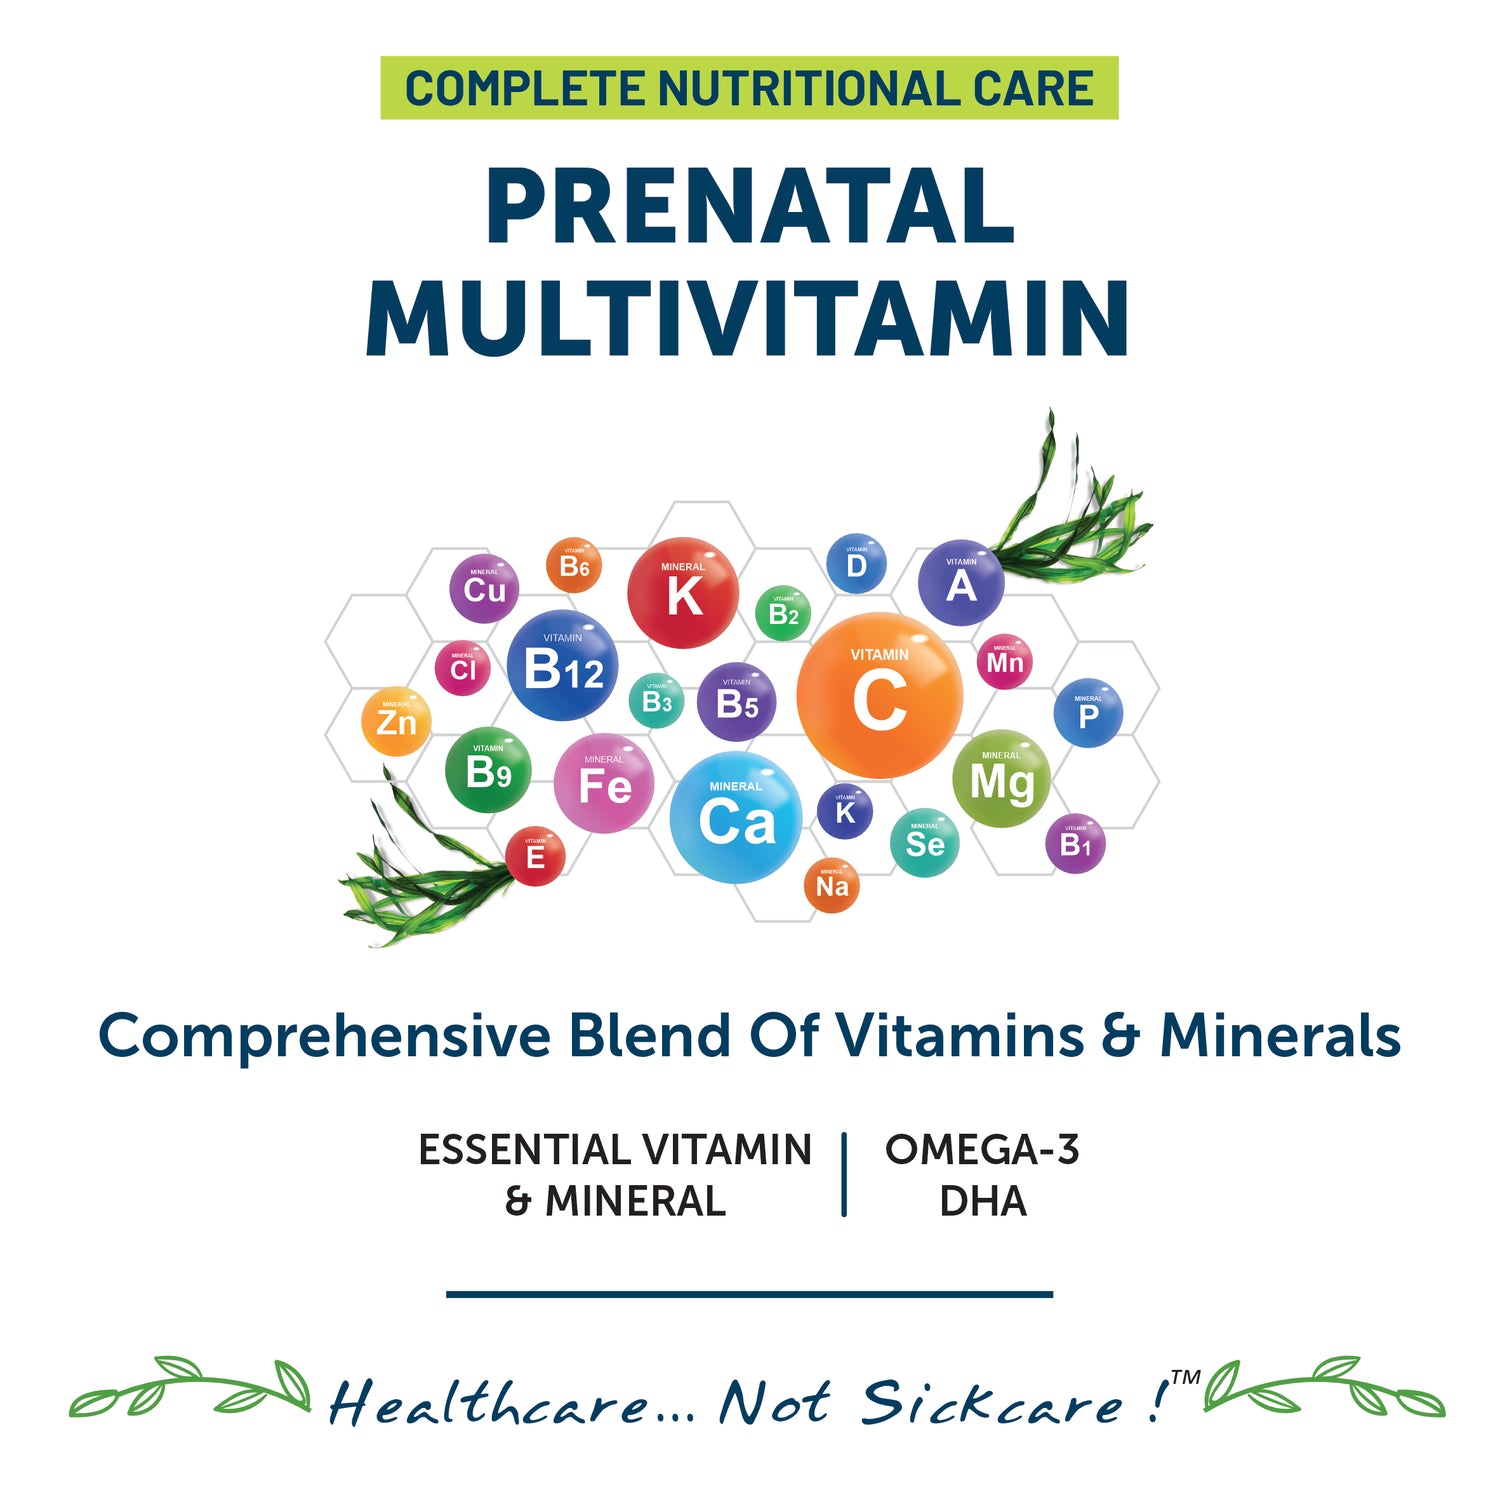 Supports Energy & Immunity Needs: VitaBliss Women’s Prenatal MultiVitamin is a rich blend of B Vitamins for boost of energy to be active throughout the day. Vitamin C & Zinc support enhanced immunity for mothers as their energy levels can be low. B Vitamins and COQ10 helps in supporting energy metabolism and fatigue reduction.